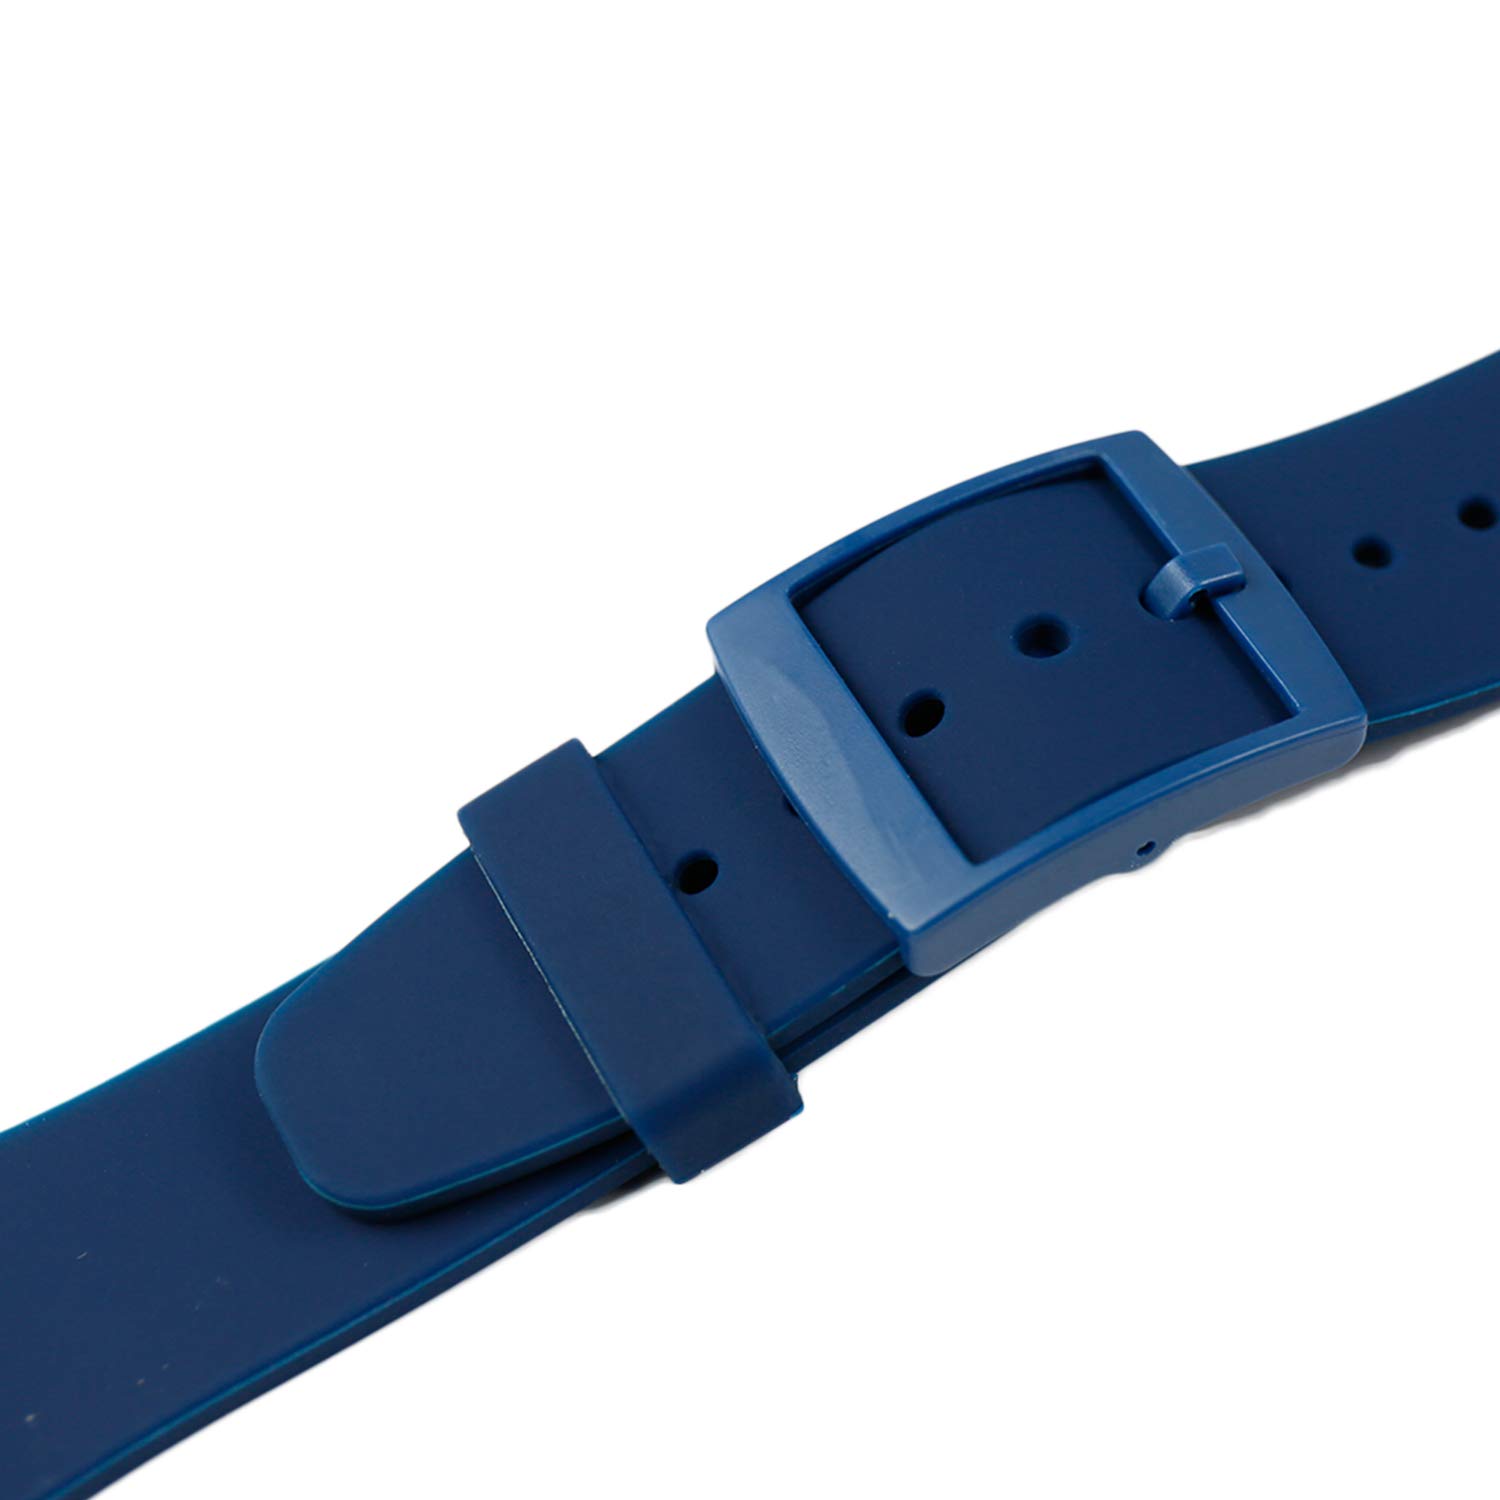 KHZBS Watch Straps Replacement Plastic Buckle and silicone loops Compatible with Swatch band - multiple colors and sizes